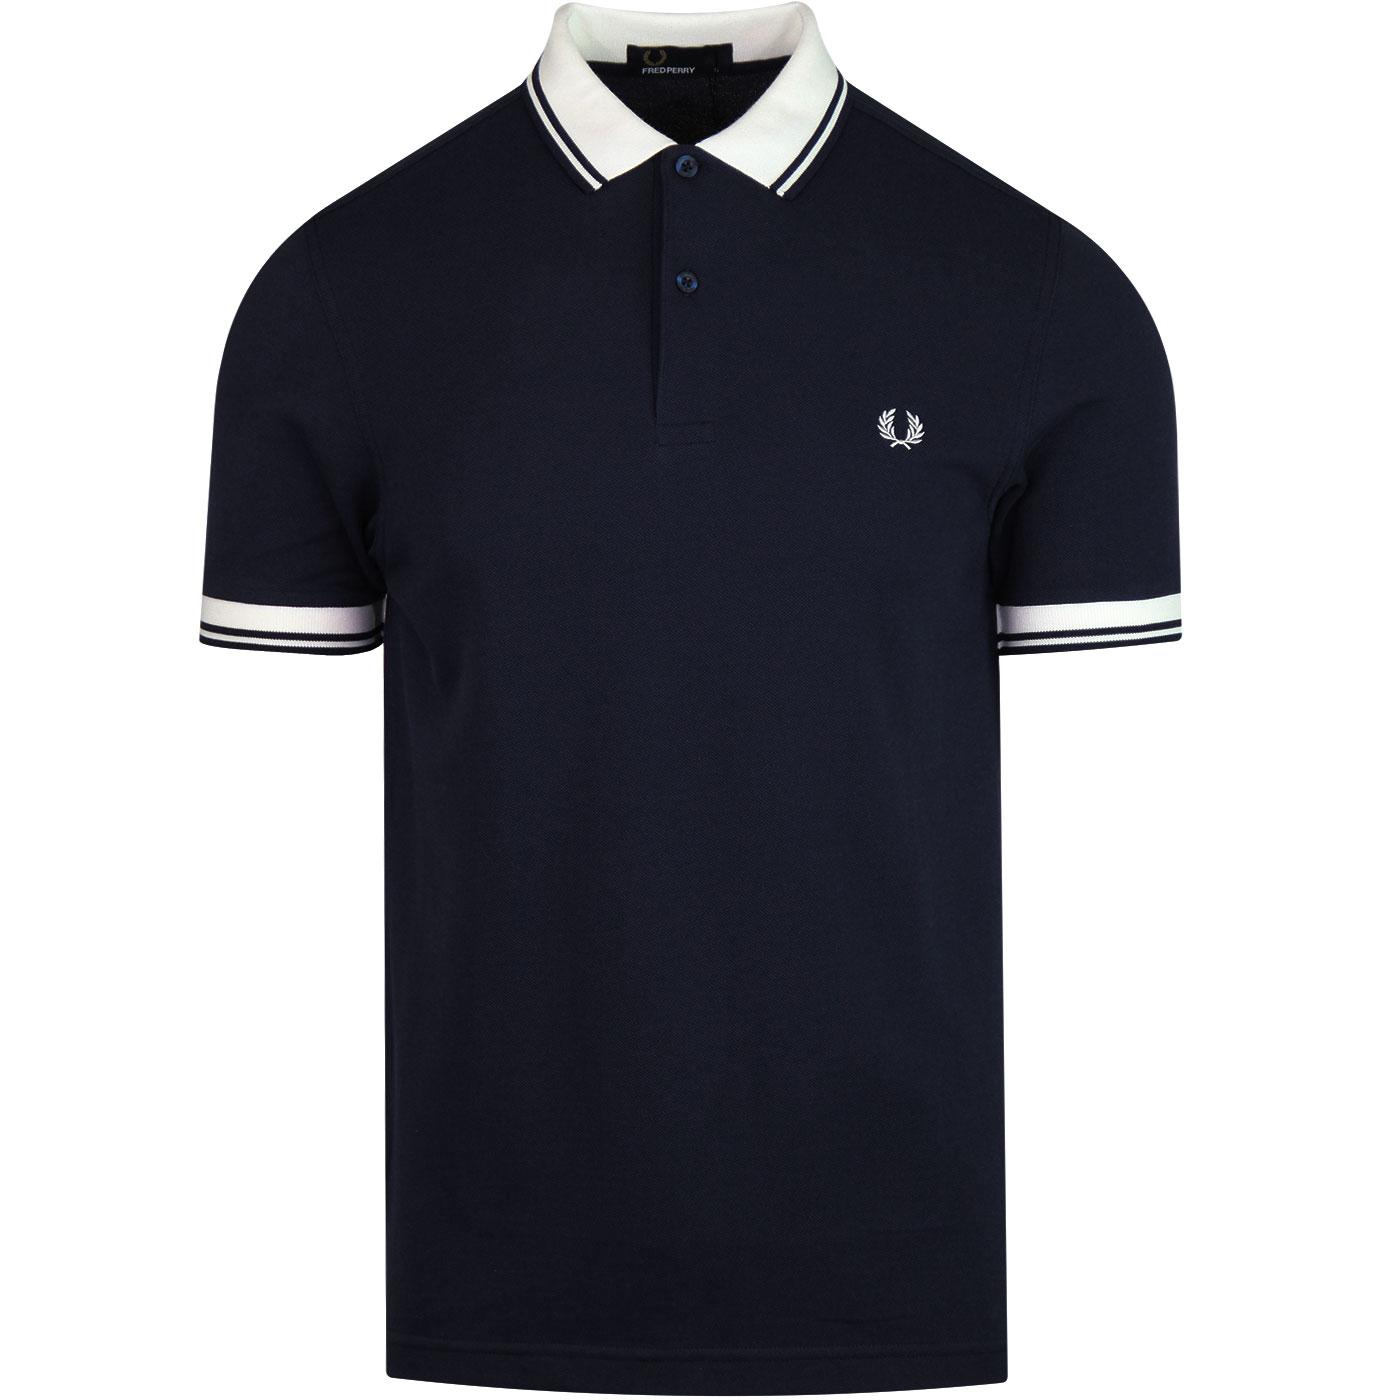 FRED PERRY Contrast Rib Pique Twin Tipped Mod Polo CB